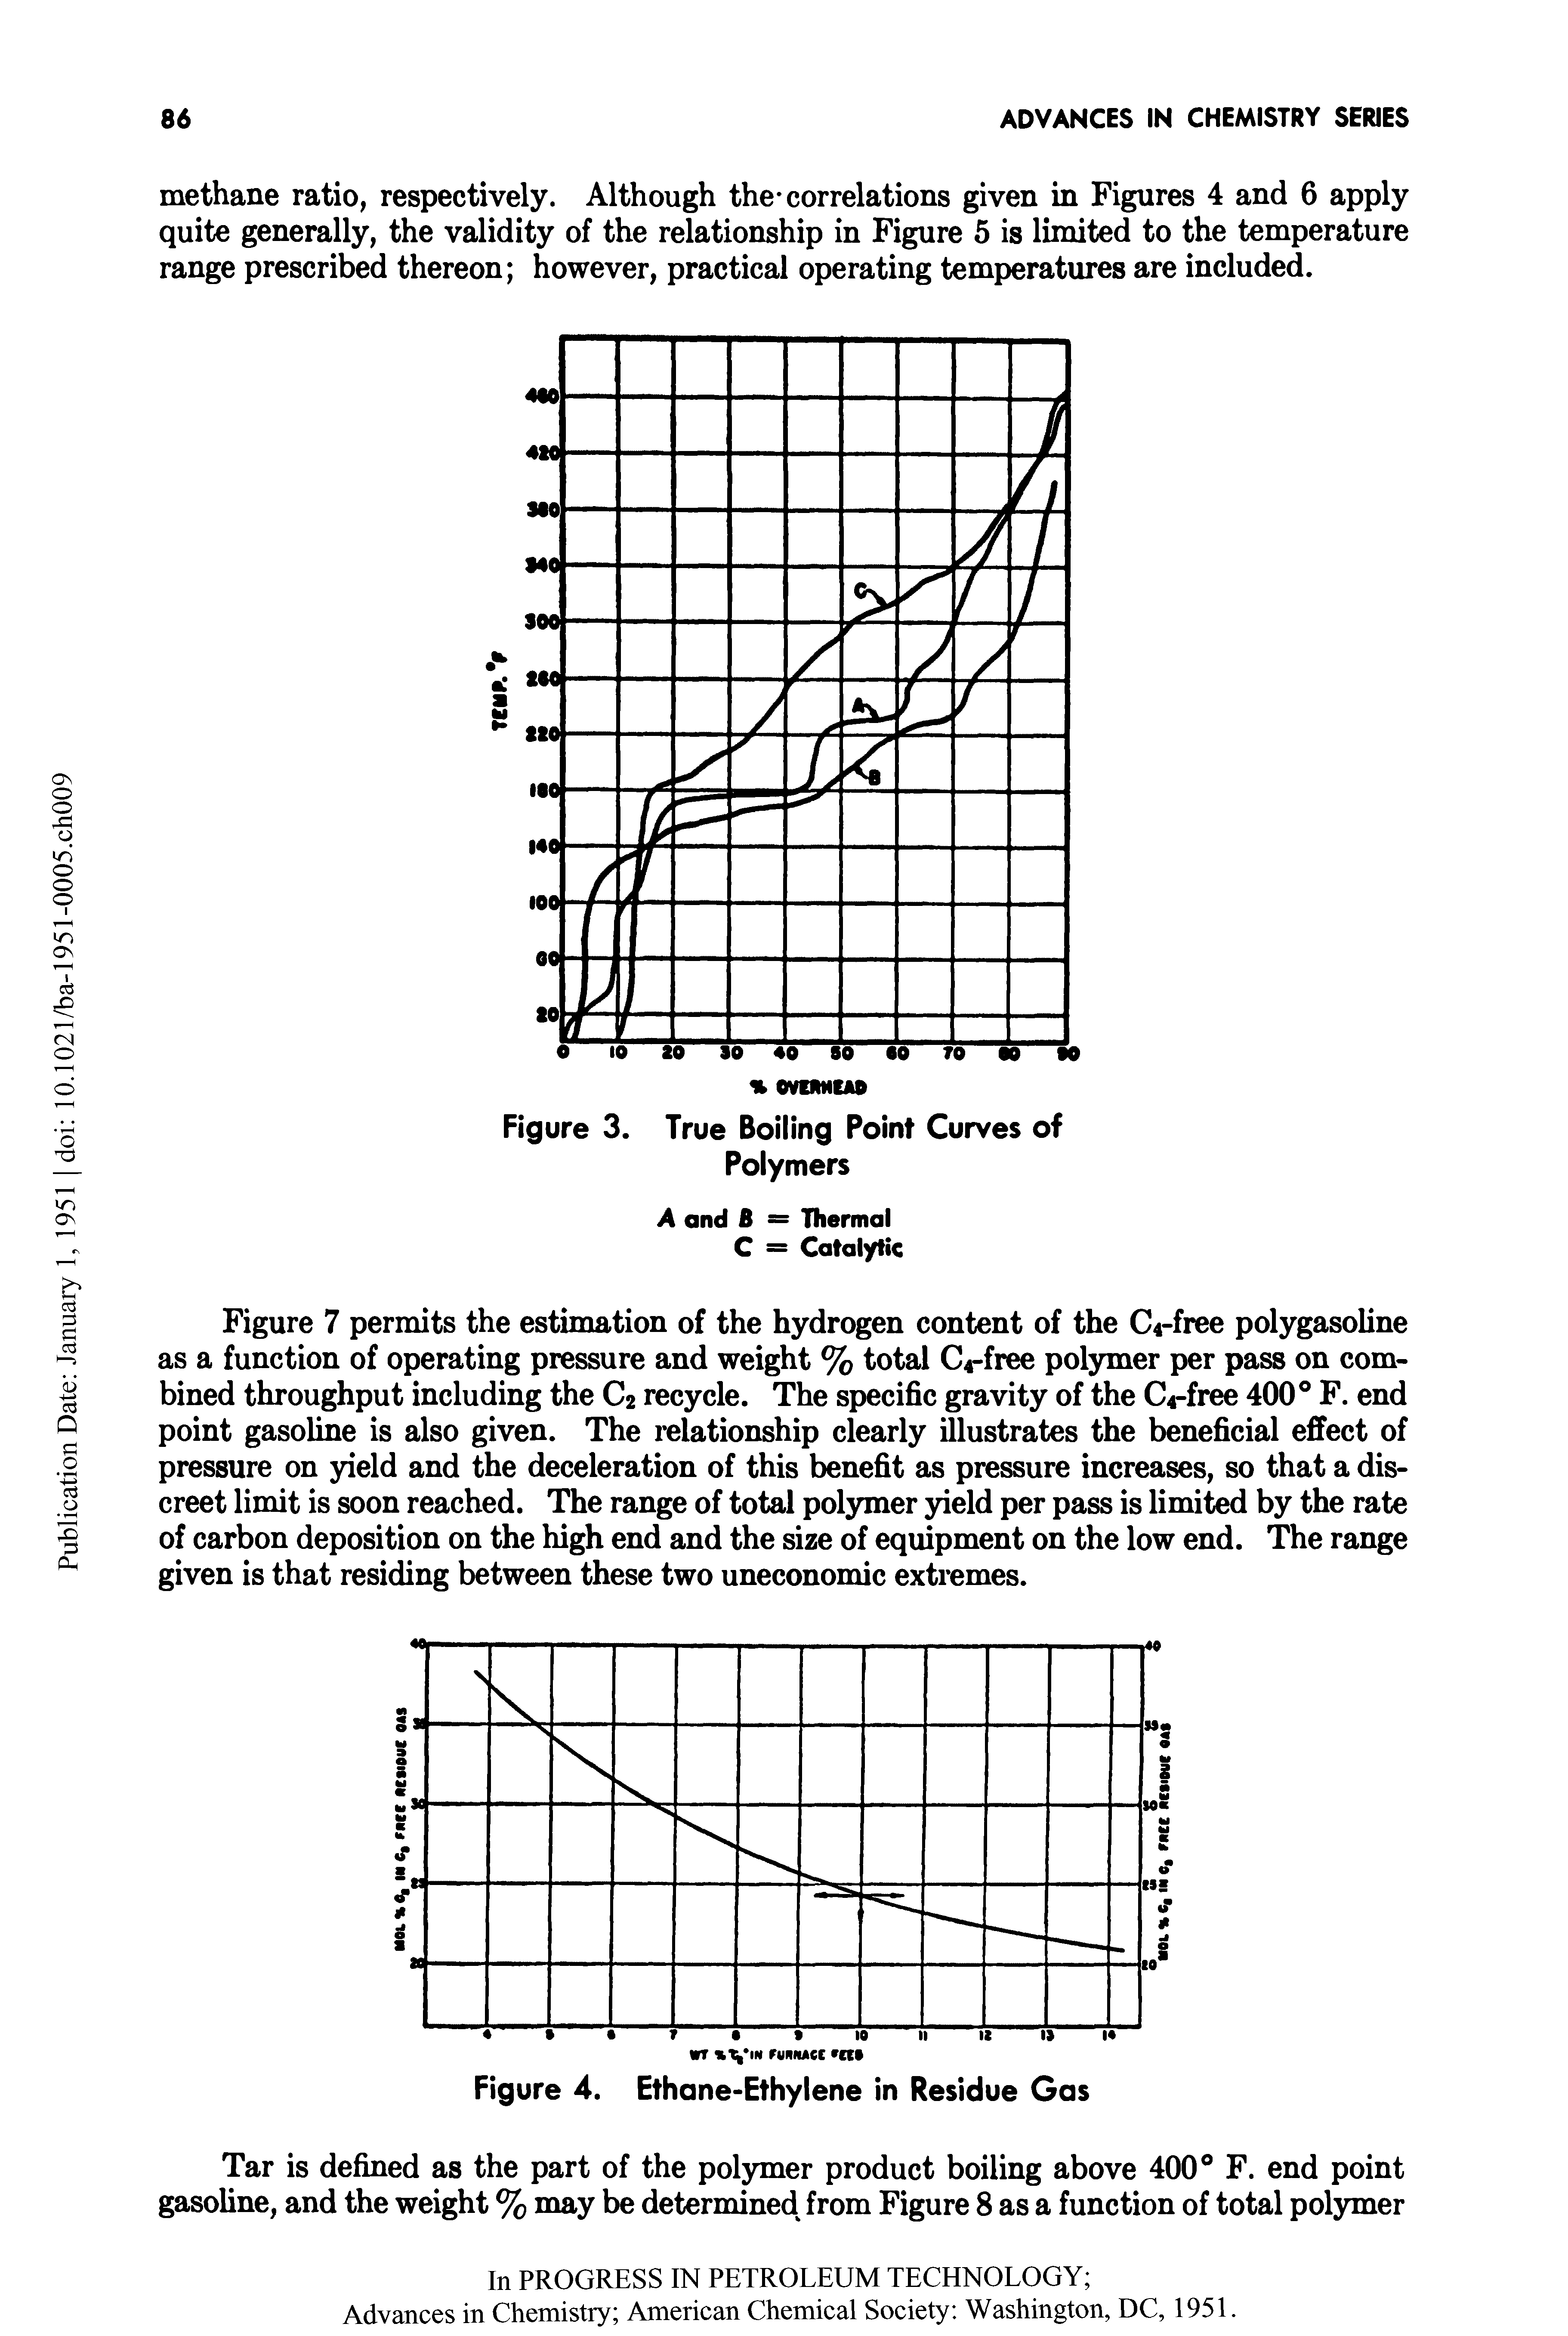 Figure 3. True Boiling Point Curves of Polymers...